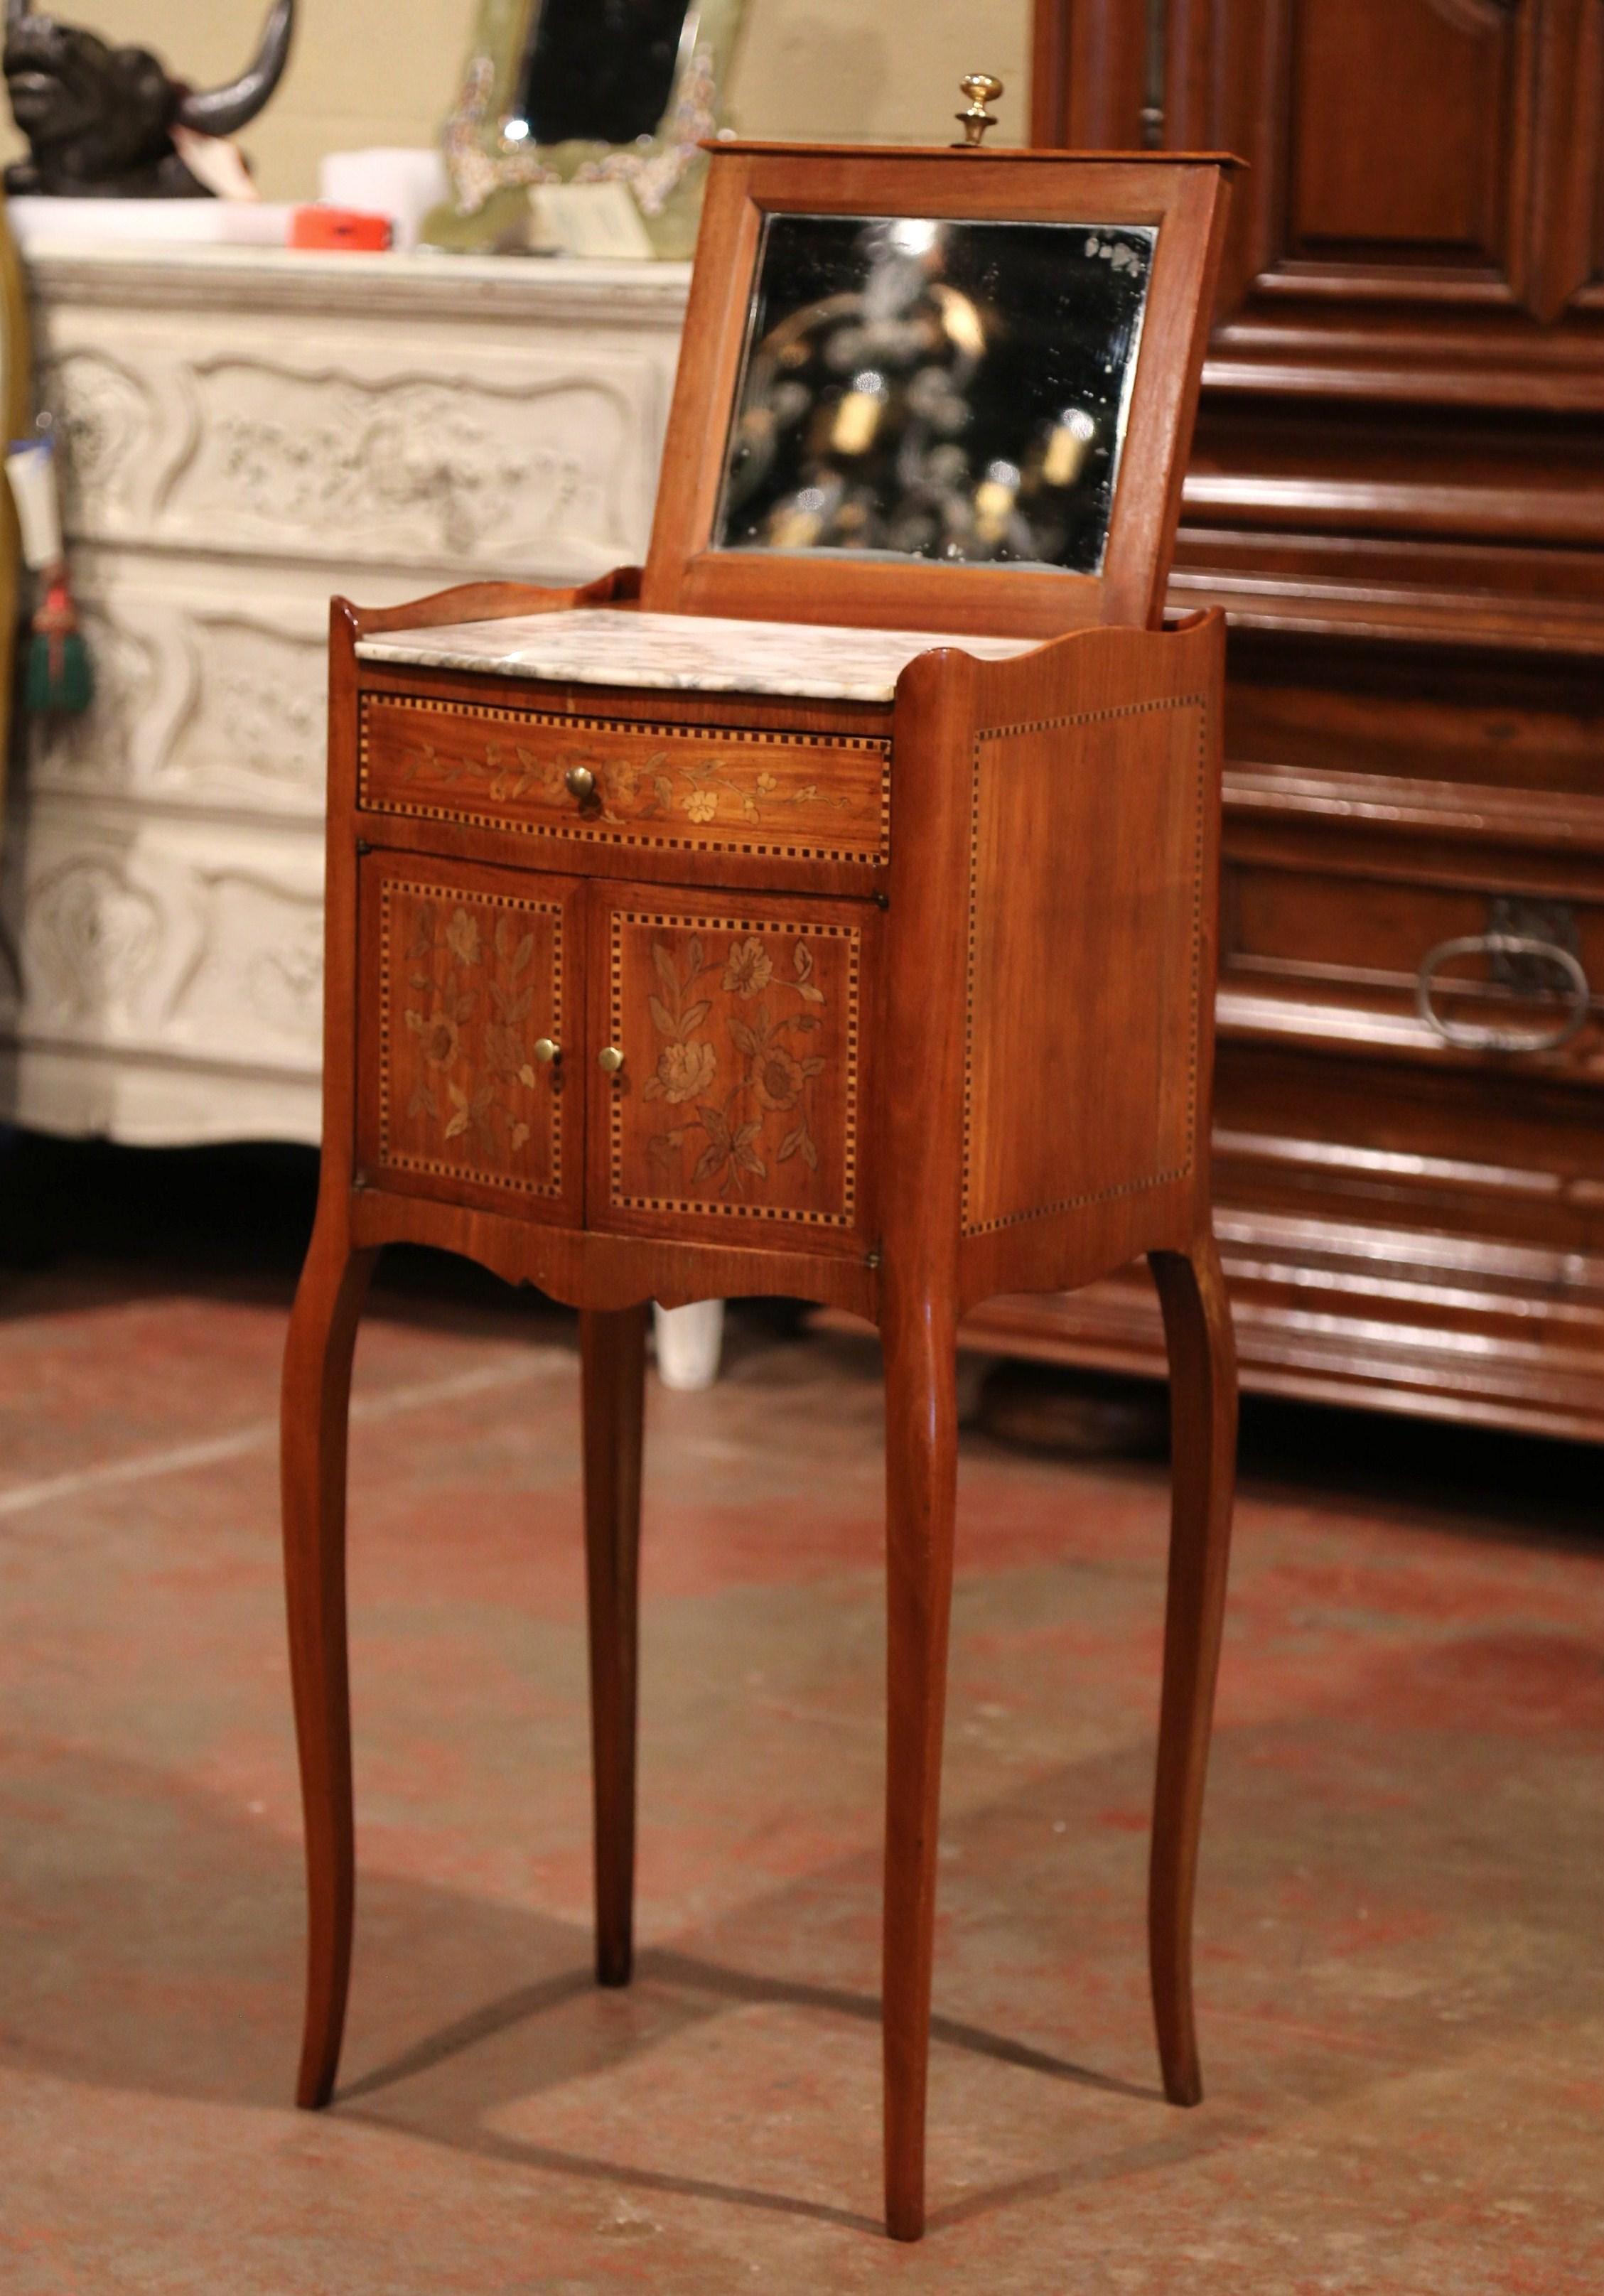 Mercury Glass 19th Century French Marquetry Walnut and Marble Nightstand with Pull up Mirror